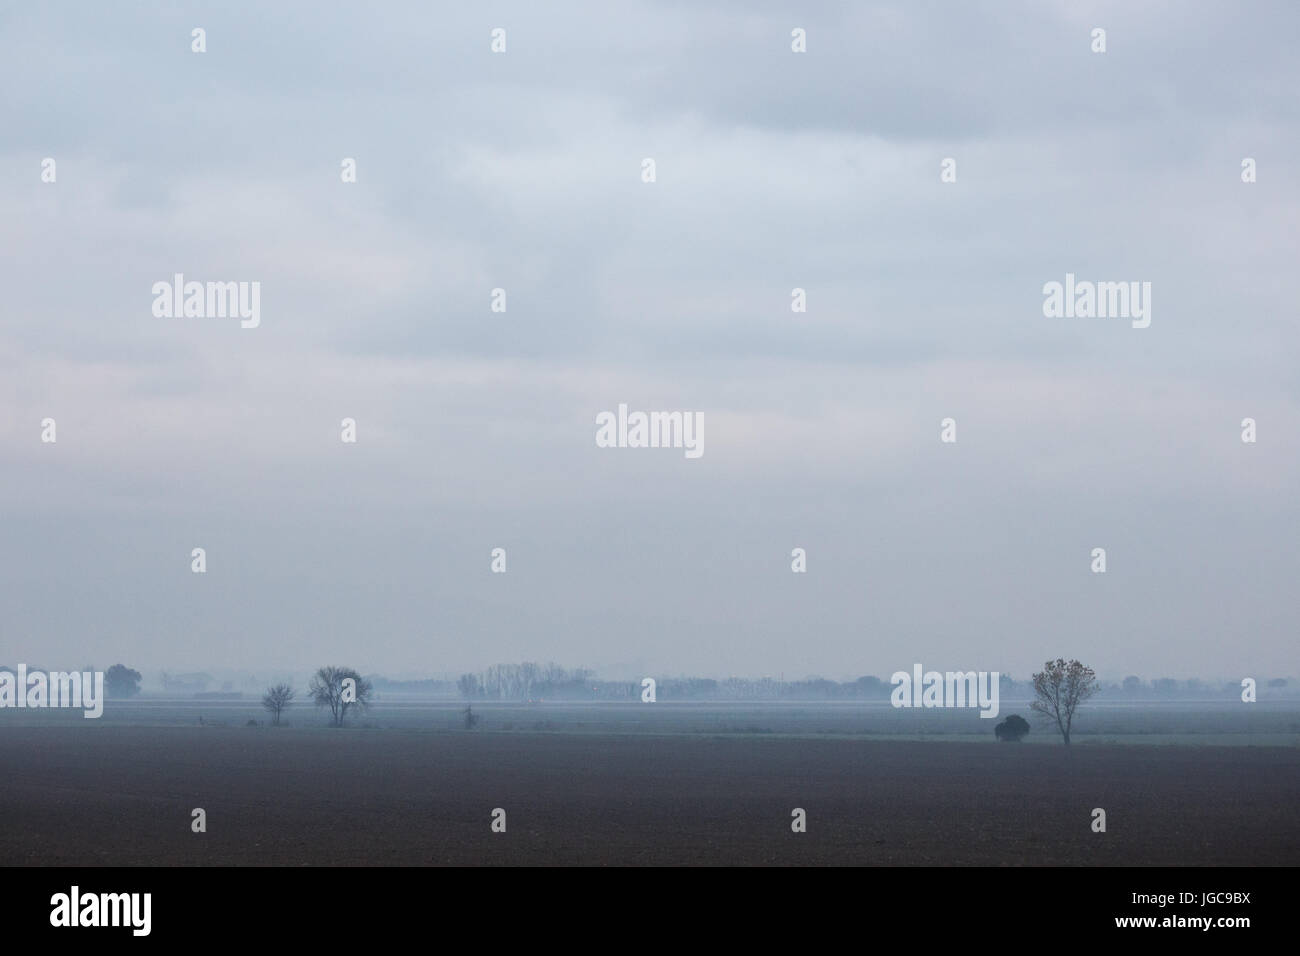 A minimalist view of some distant trees in the fog Stock Photo